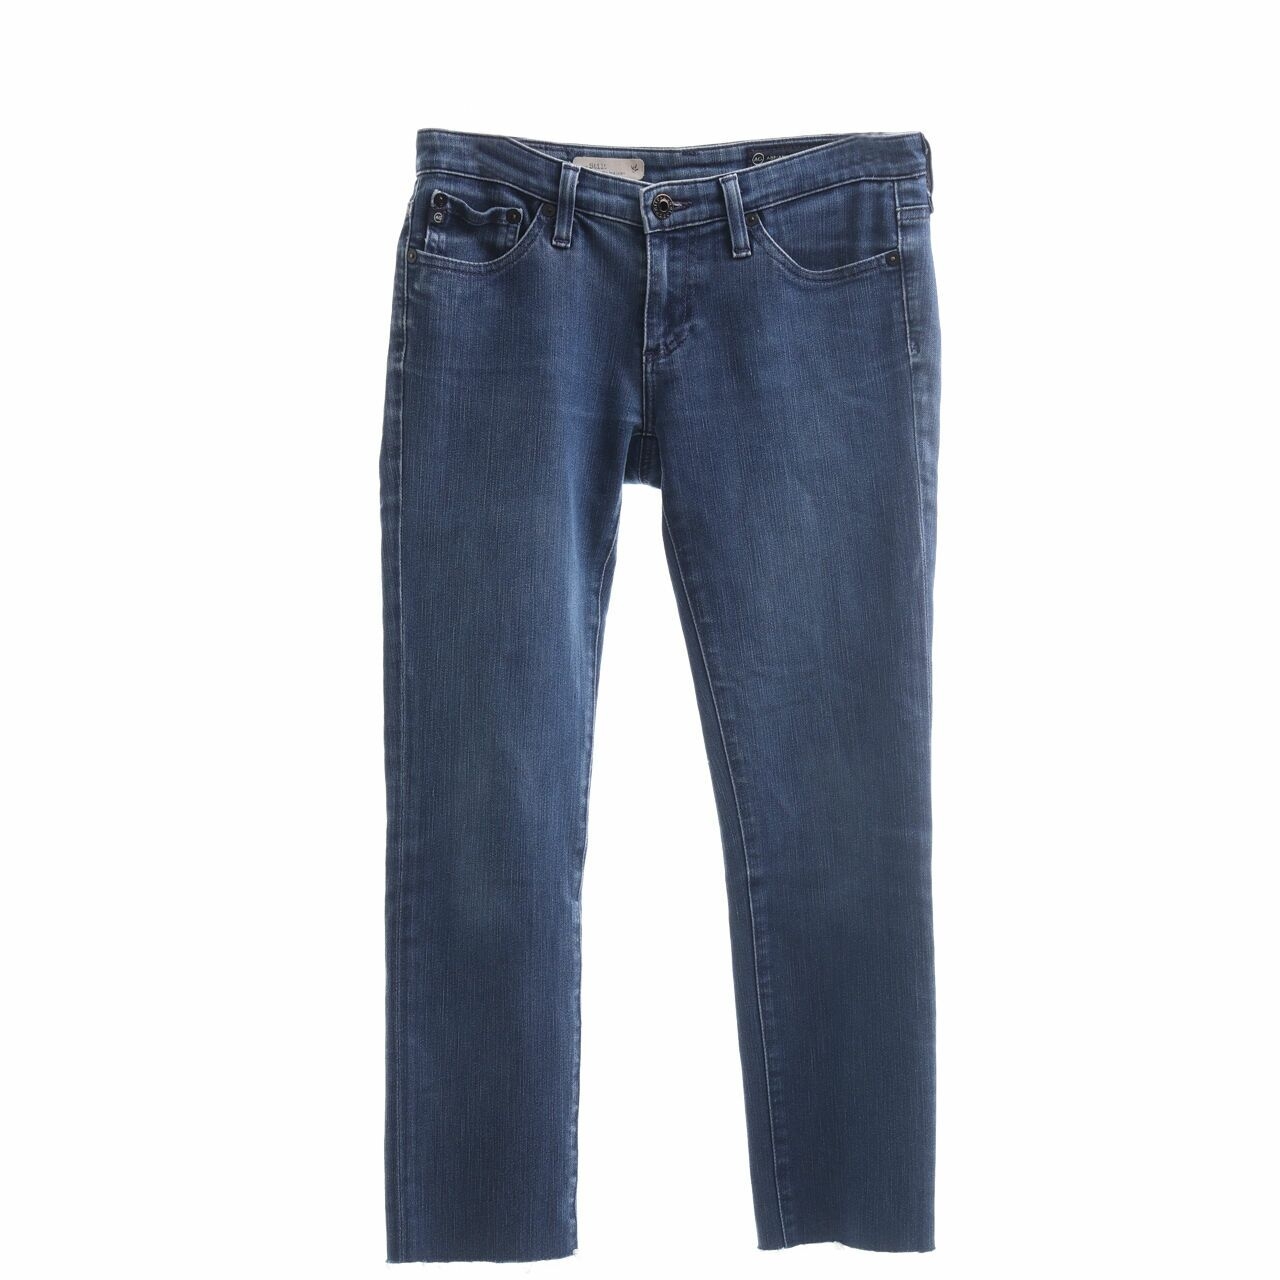 Adriano Goldschmied Dark Blue Washed Long Pants